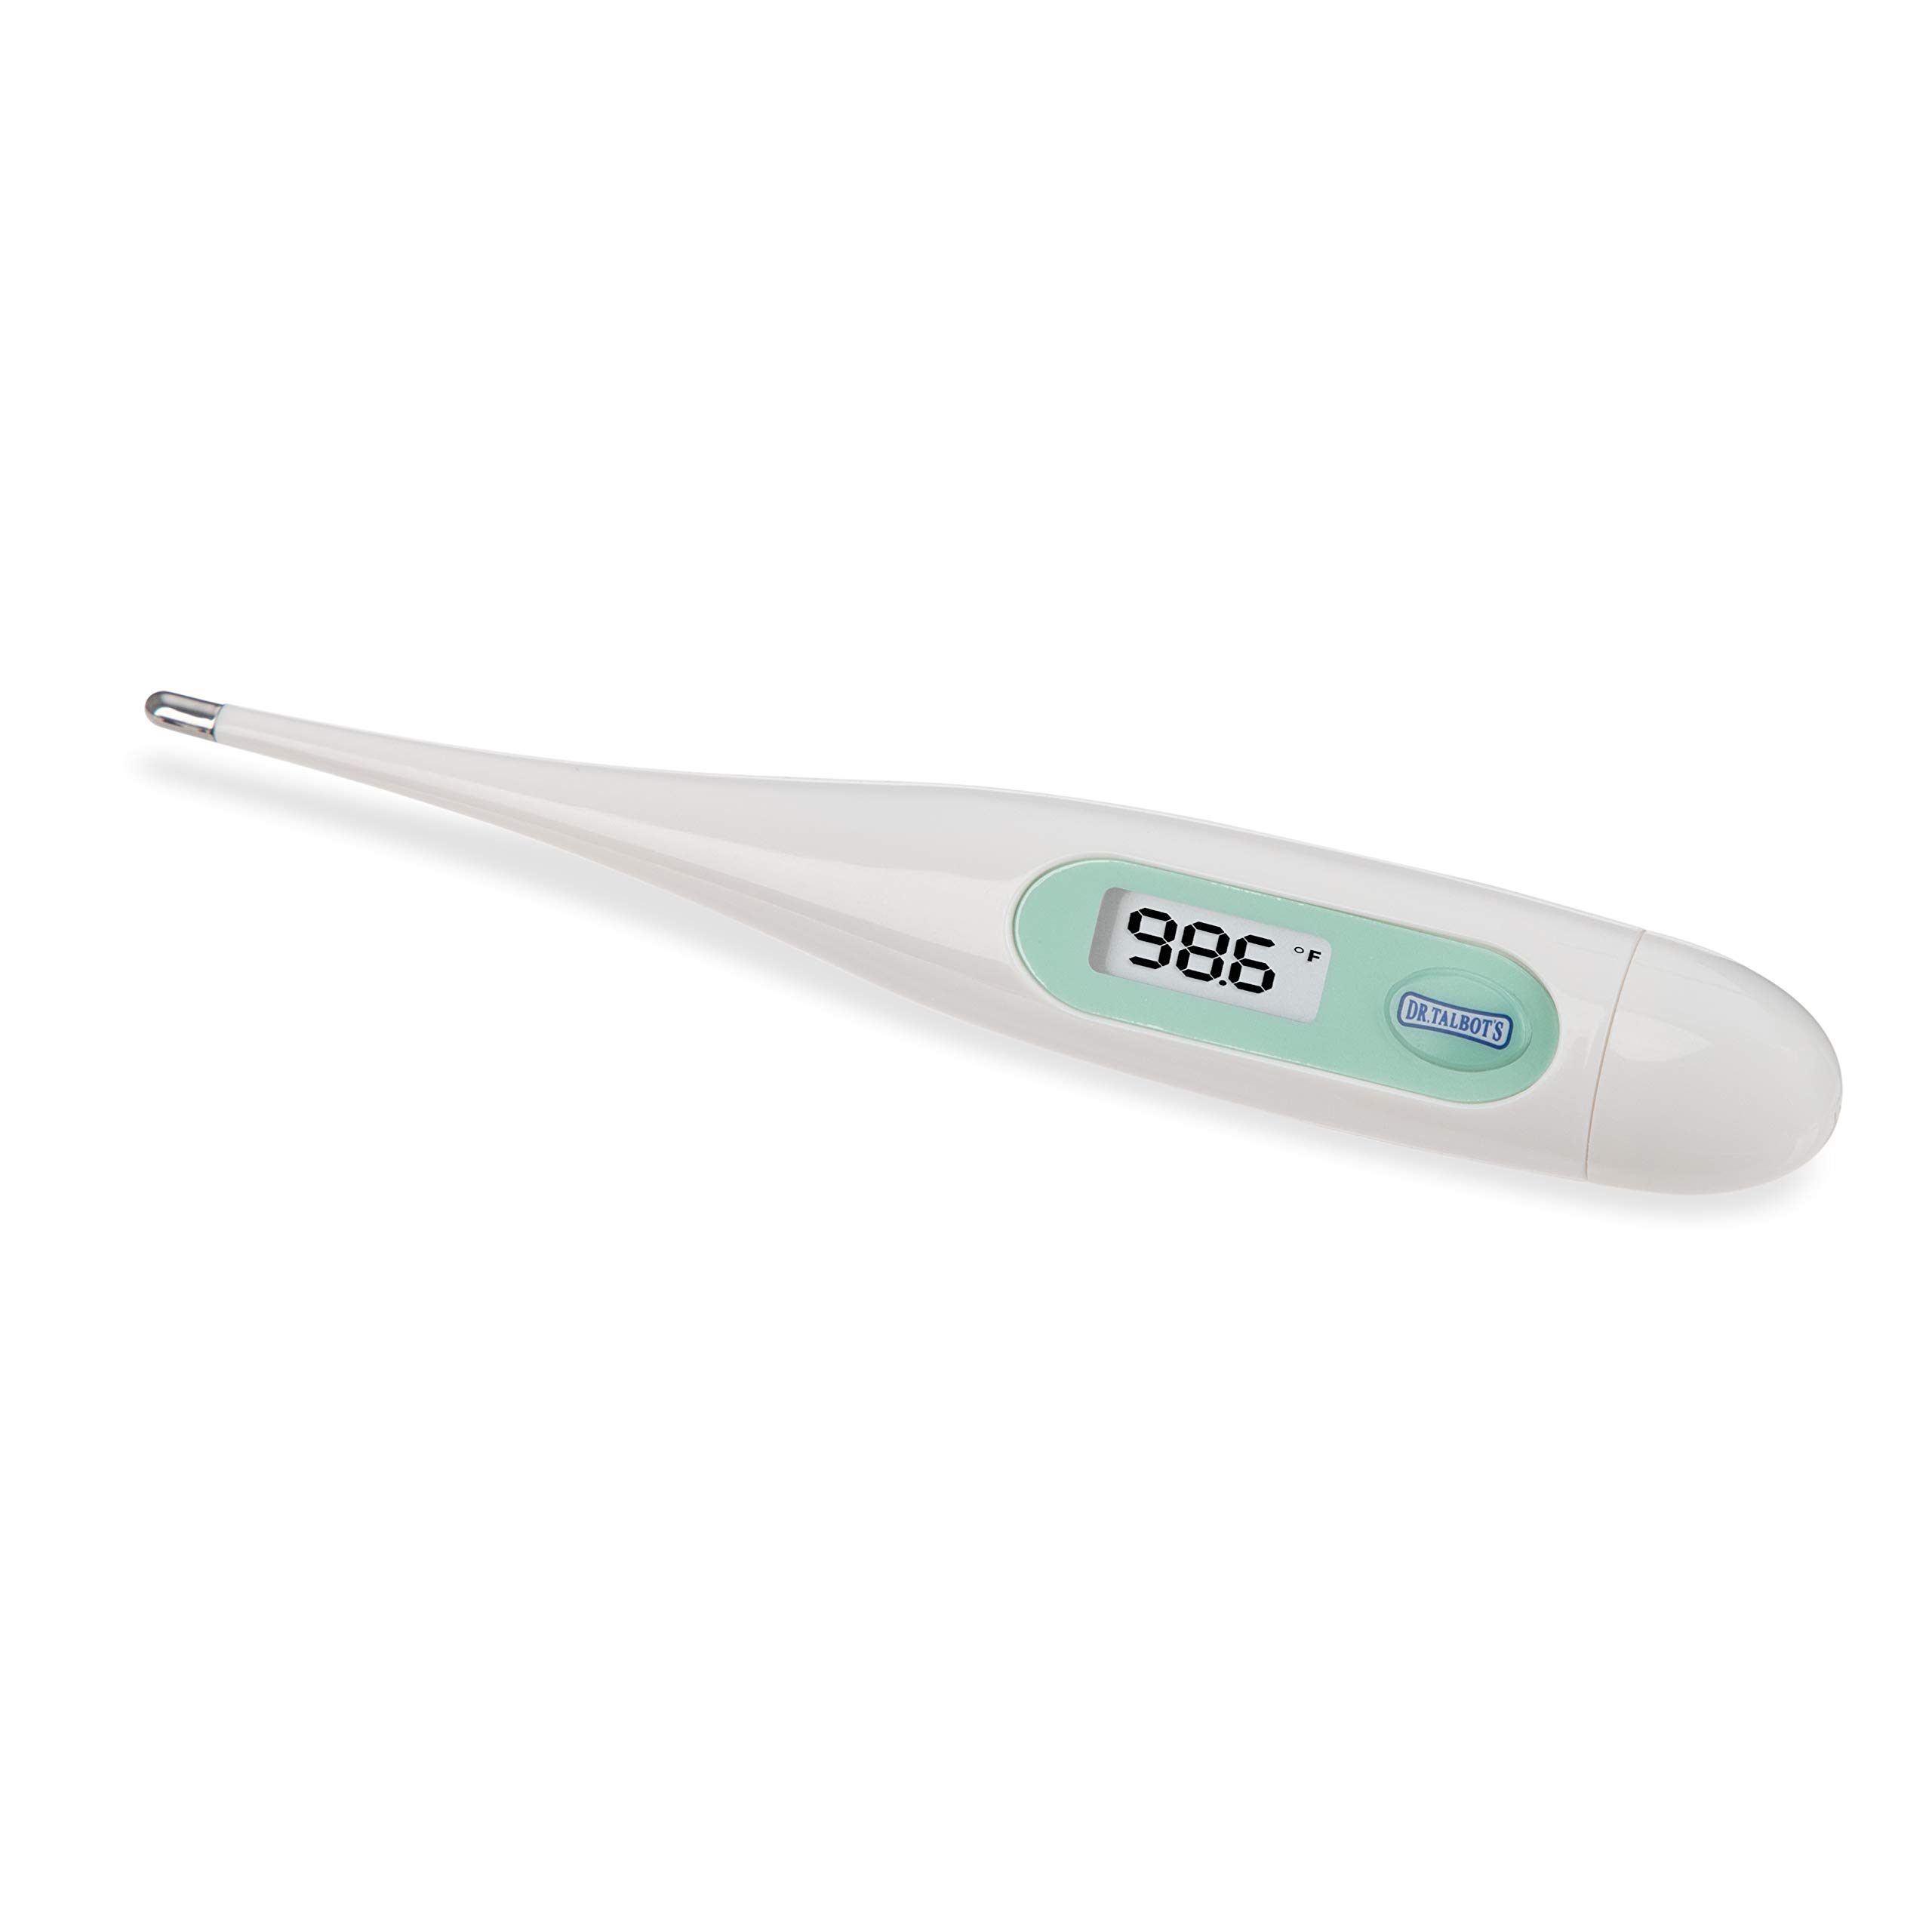 Dr. Talbot's Baby Digital Thermometer with Protective Cover for Storage & Travel